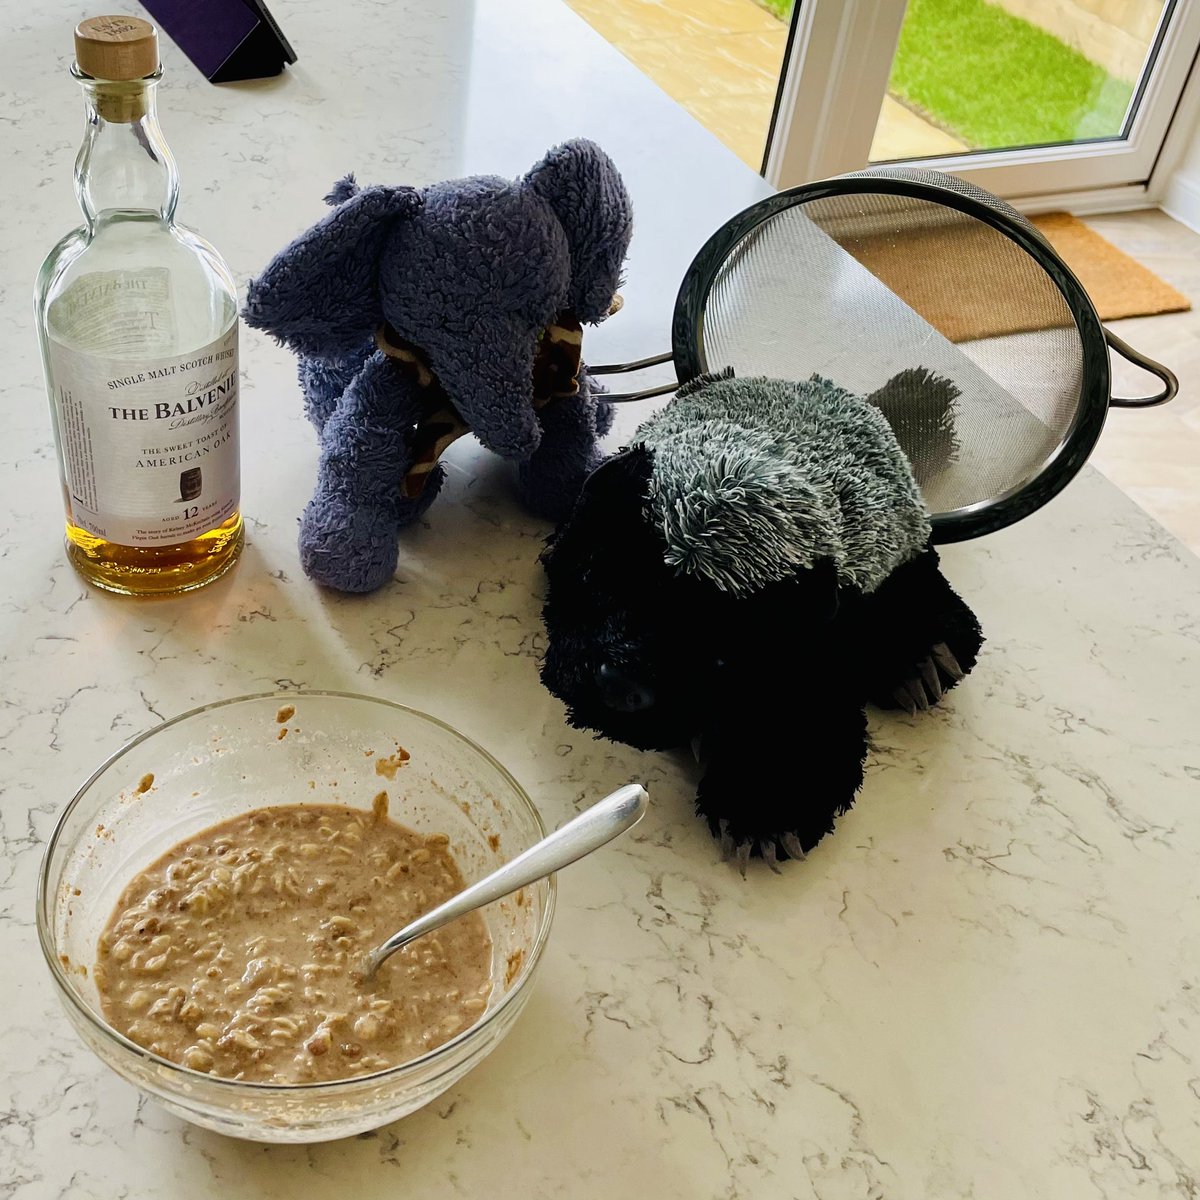 Fuelling up on oats before we go haggis hunting 🏴󠁧󠁢󠁳󠁣󠁴󠁿 Got bait but think we’re going to need a bigger net🤔